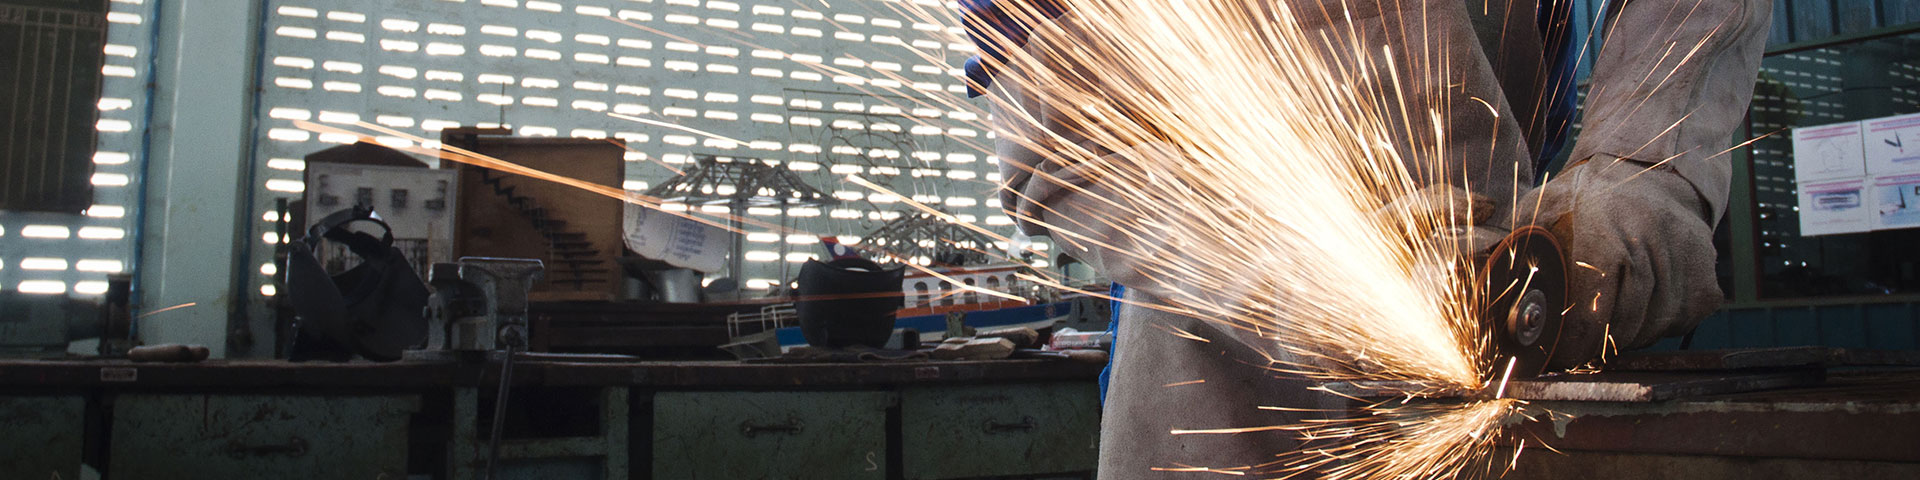 A person operates a grinder in a workshop and sparks are coming out of it.